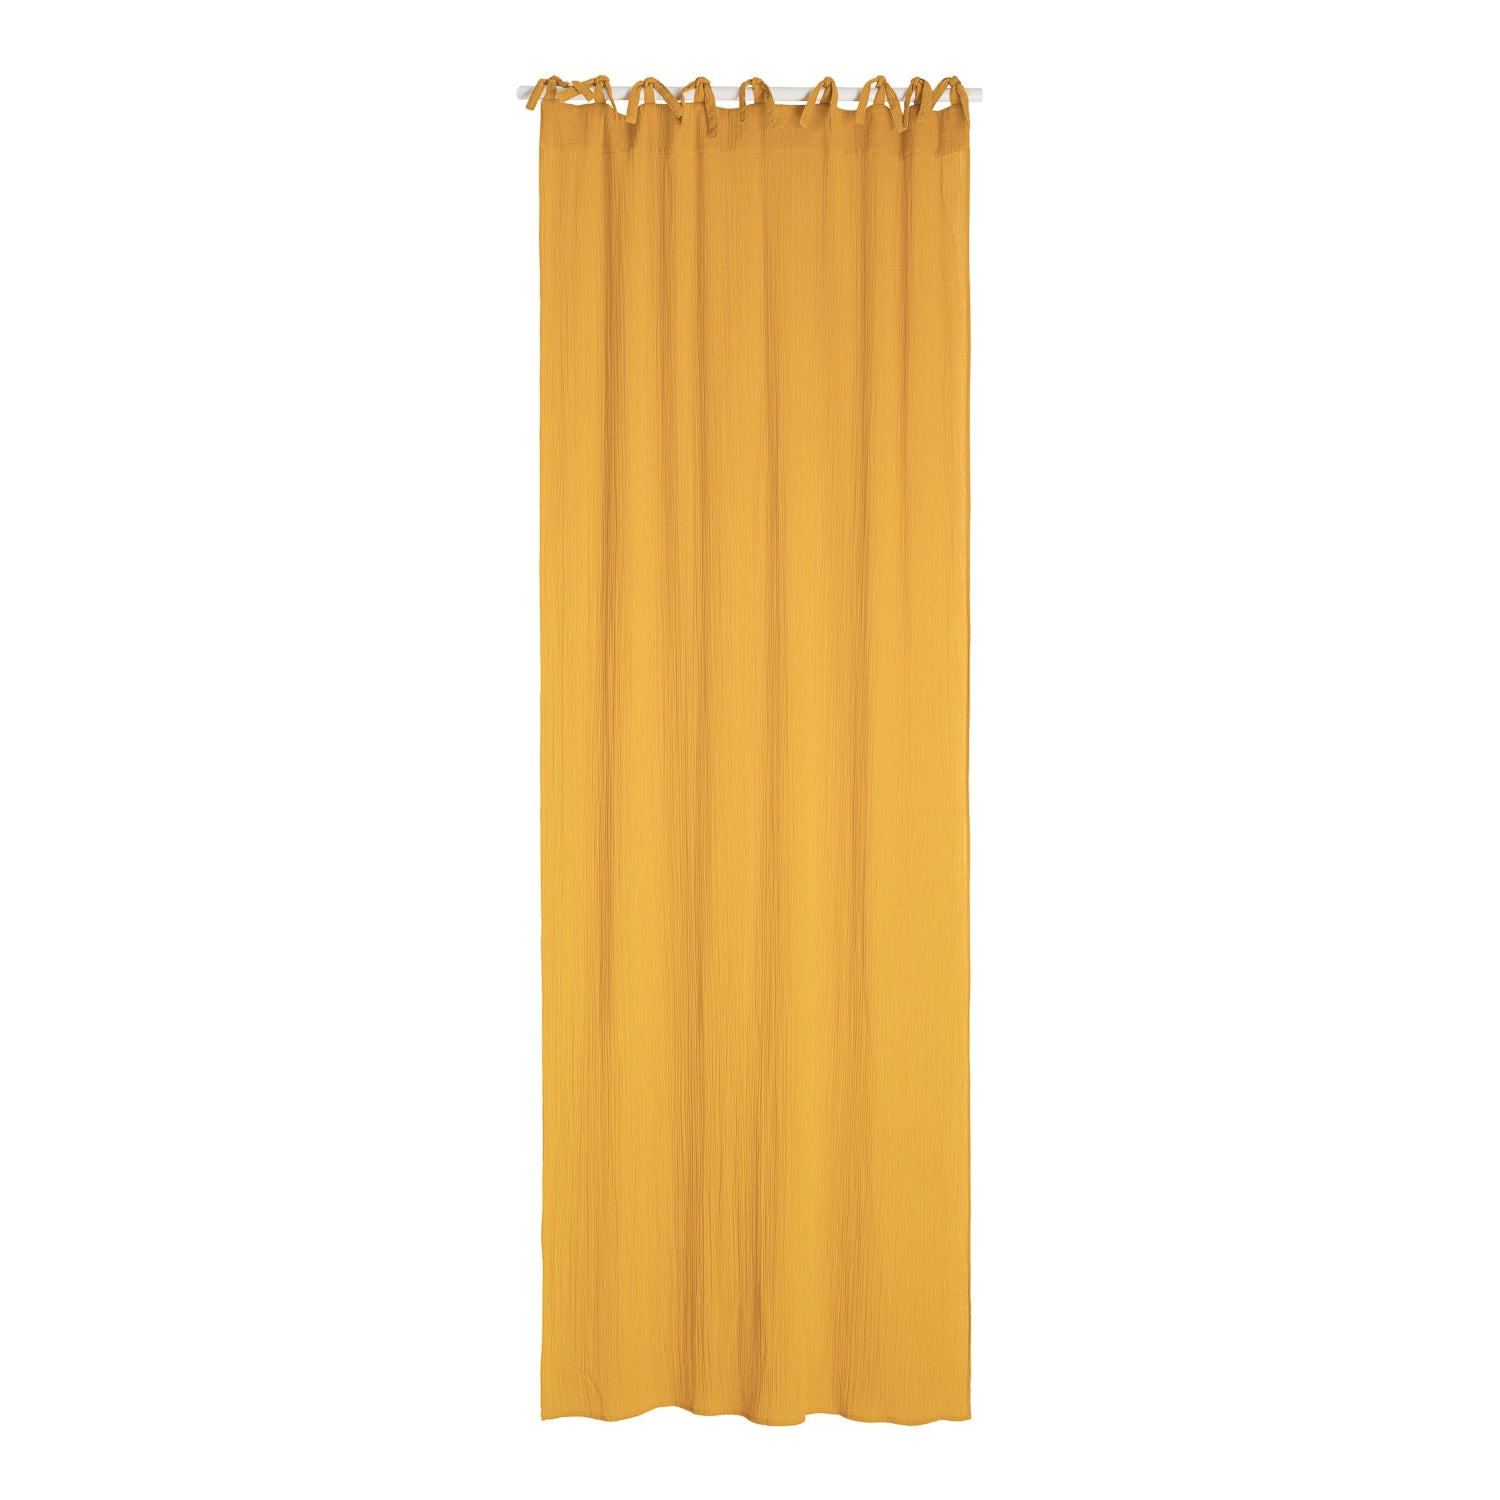 Wigiwama Yellow Curry Curtain at Rugs by Roo